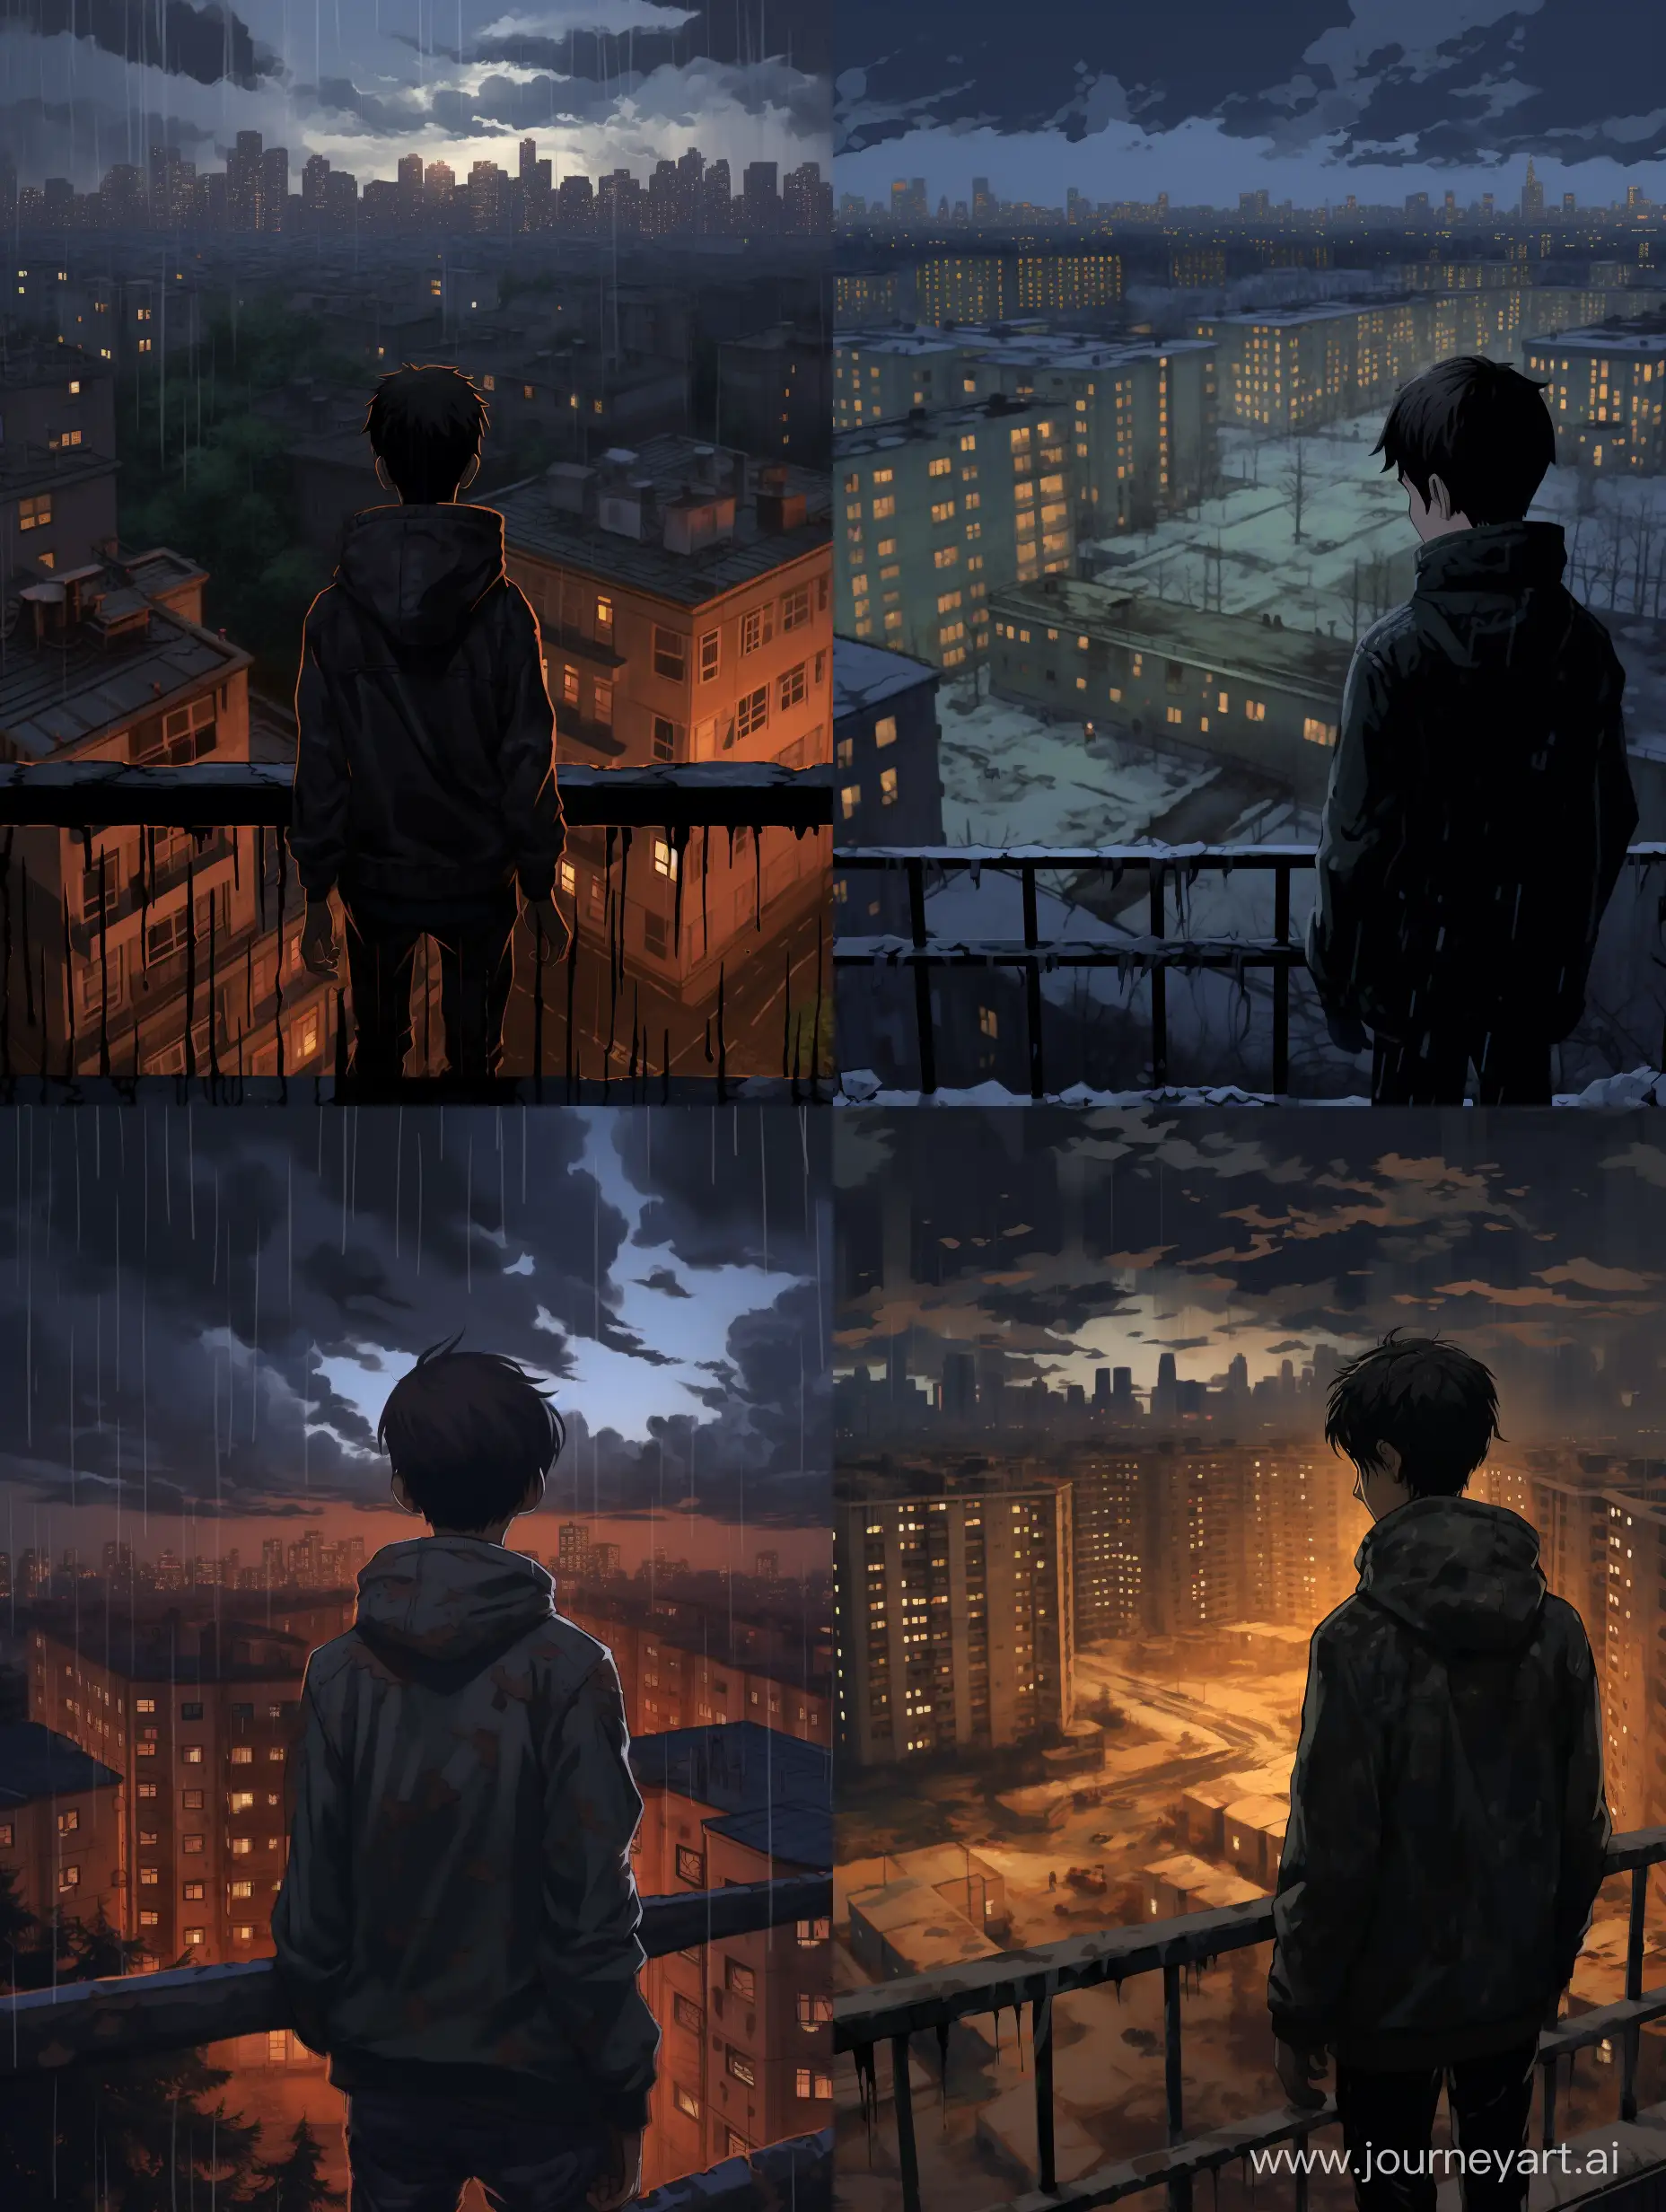 Lonely-Anime-Boy-Amidst-SovietStyle-HighRises-in-Dark-Winter-Atmosphere